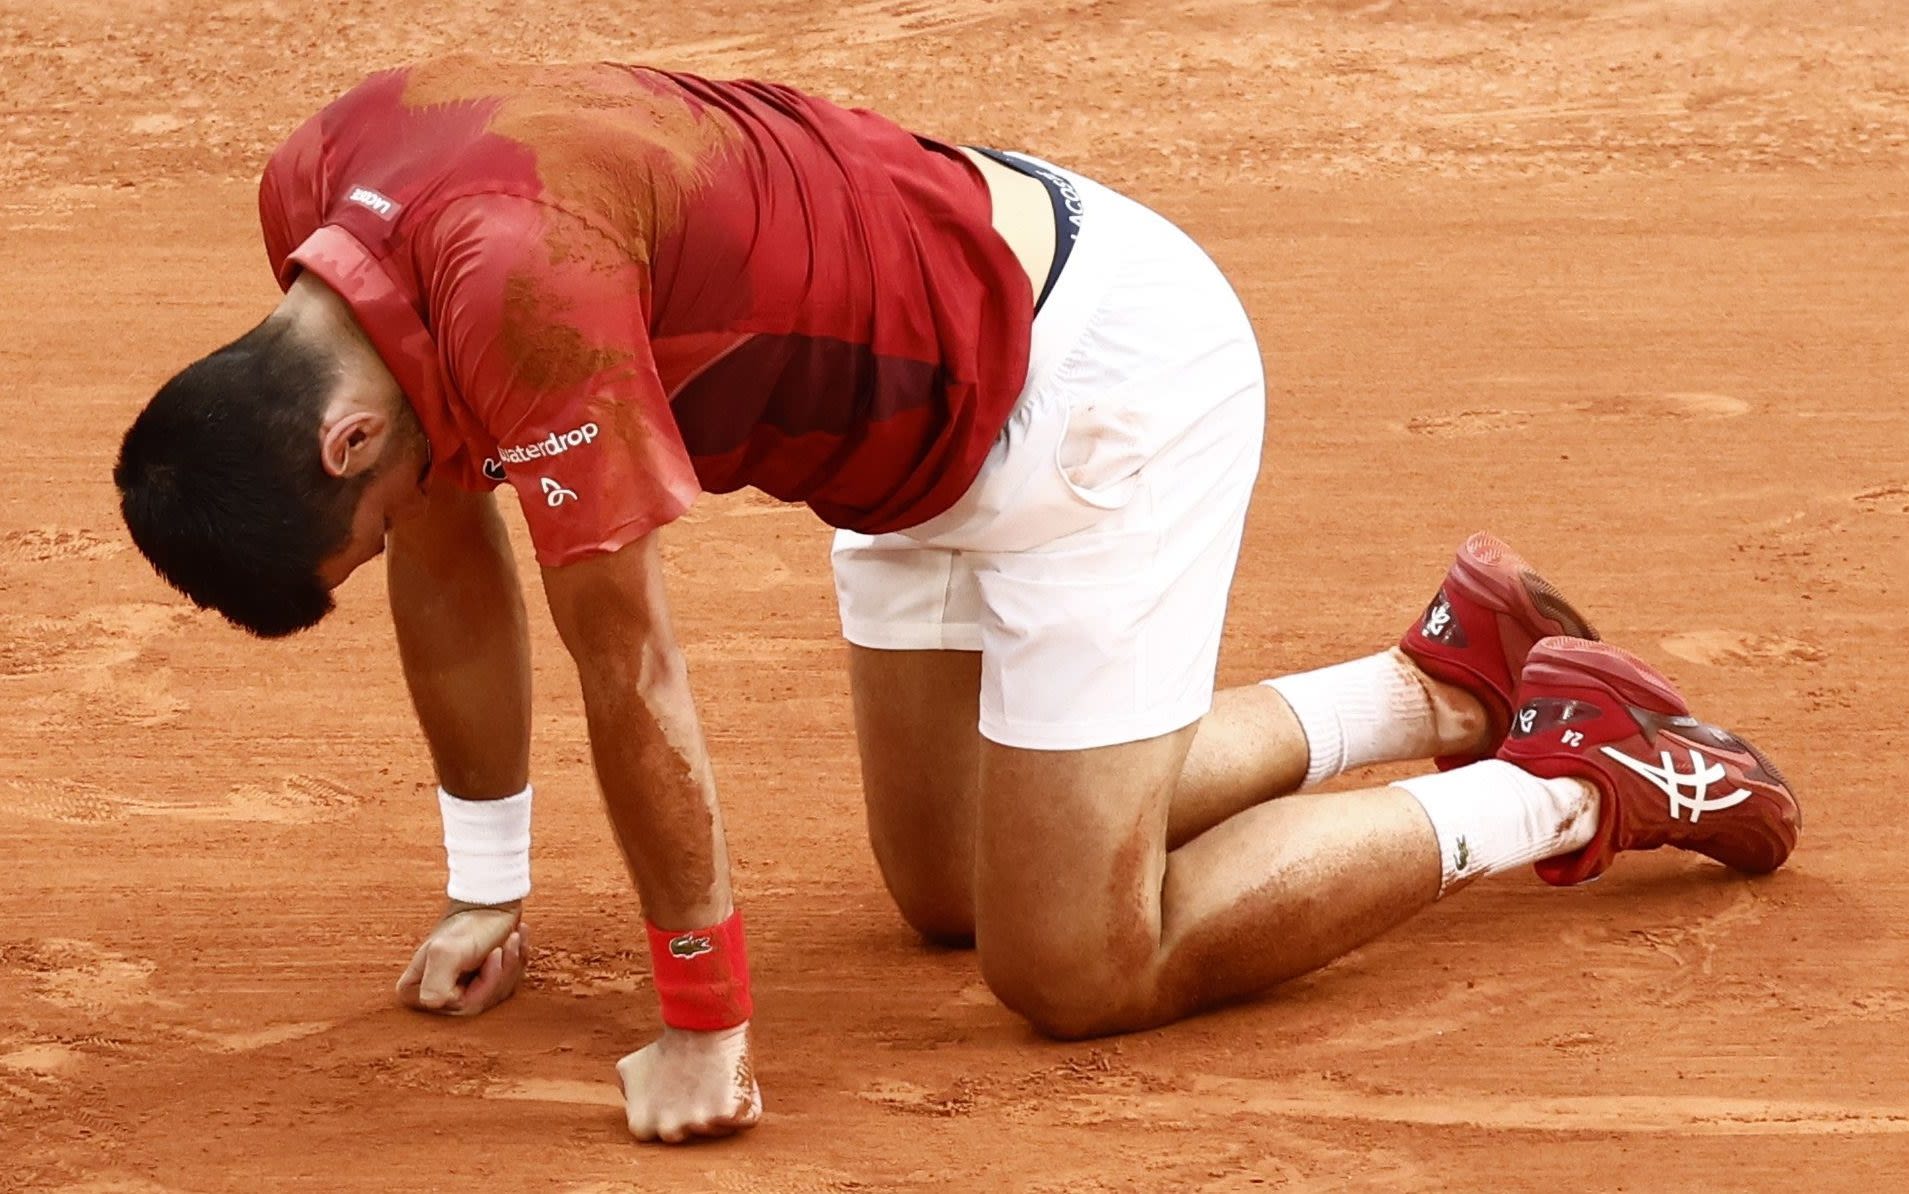 Novak Djokovic overcomes injury scare in five-set thriller at French Open